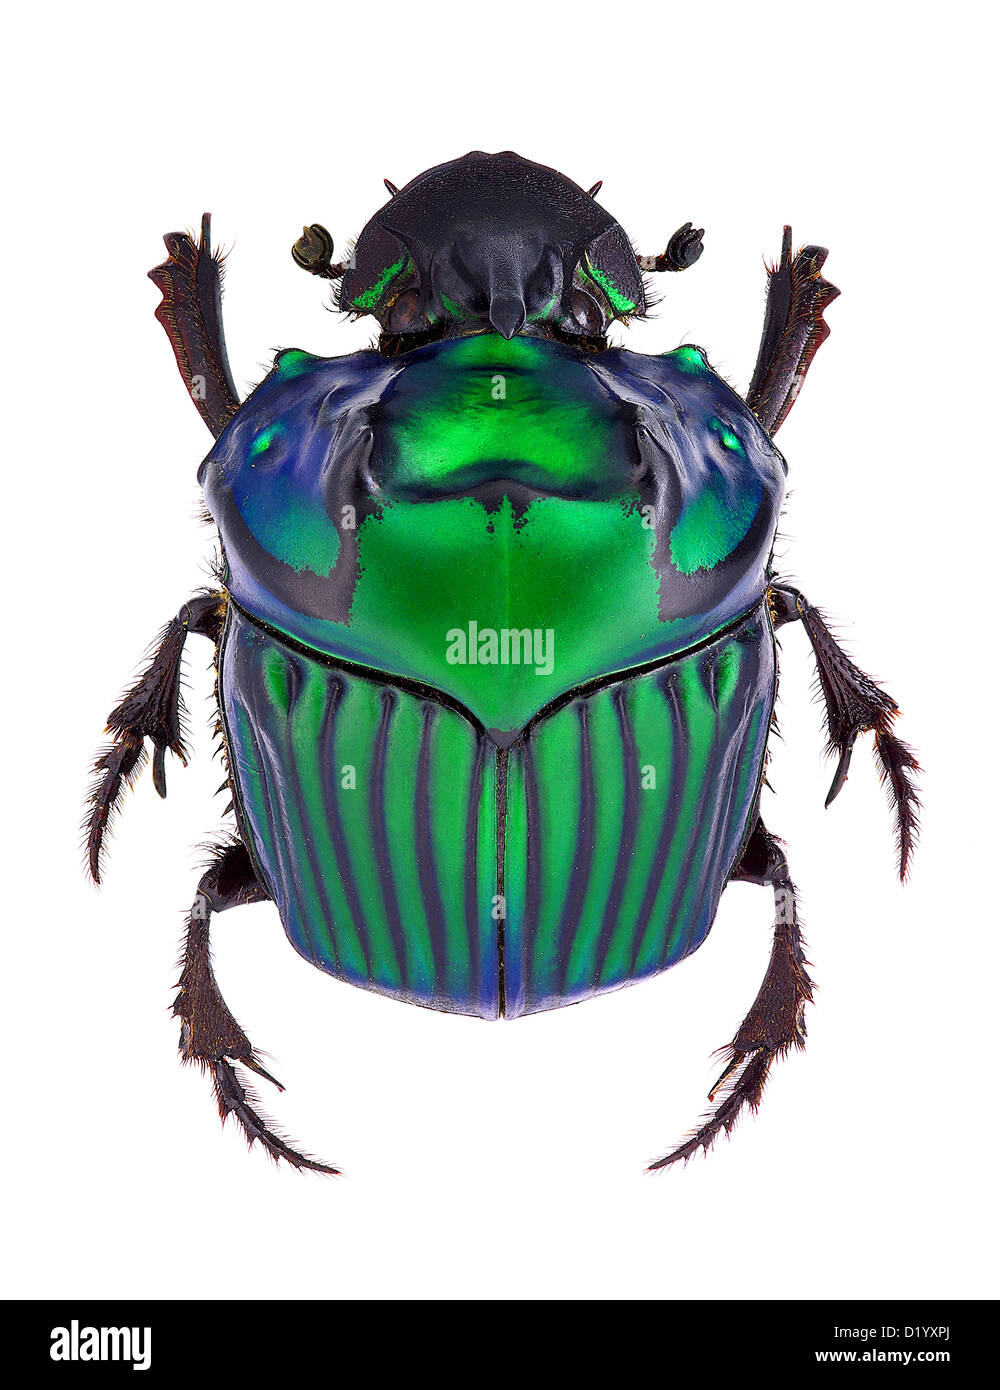 Oxysternon conspicillatum, dung beetle from South America, male specimen Stock Photo